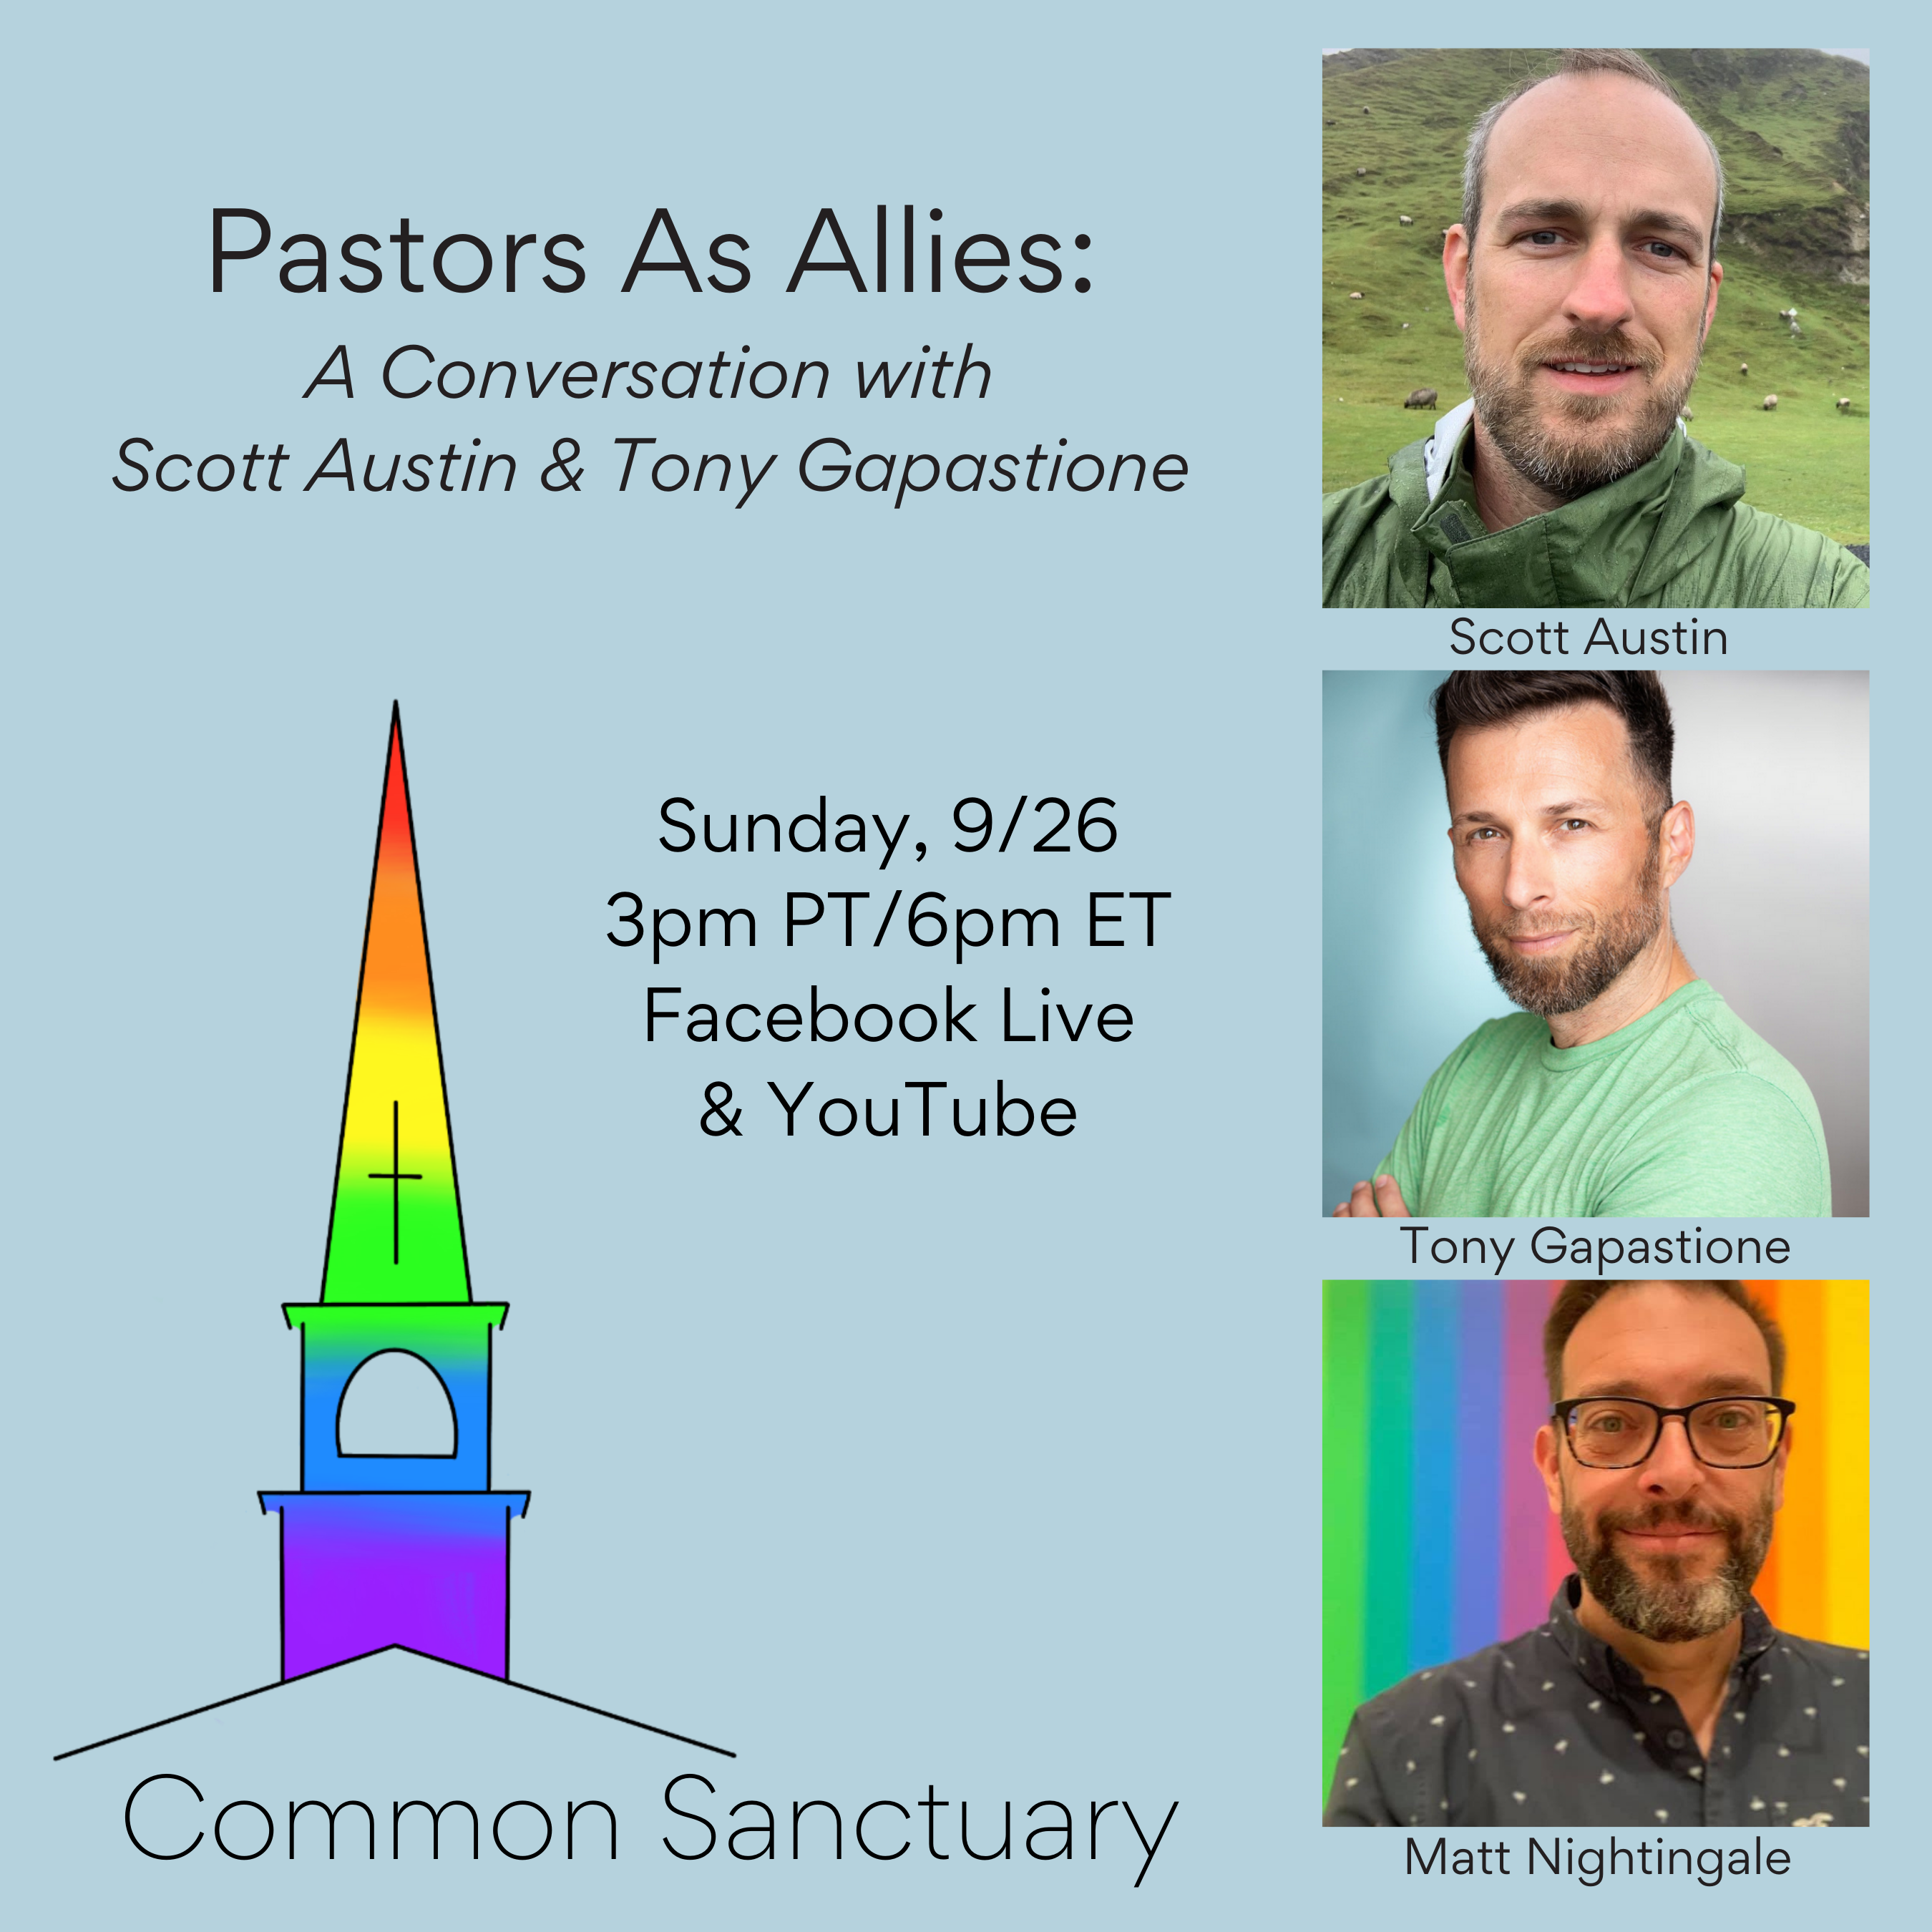 Pastors As Allies: A Conversation with Scott Austin and Tony Gapastione